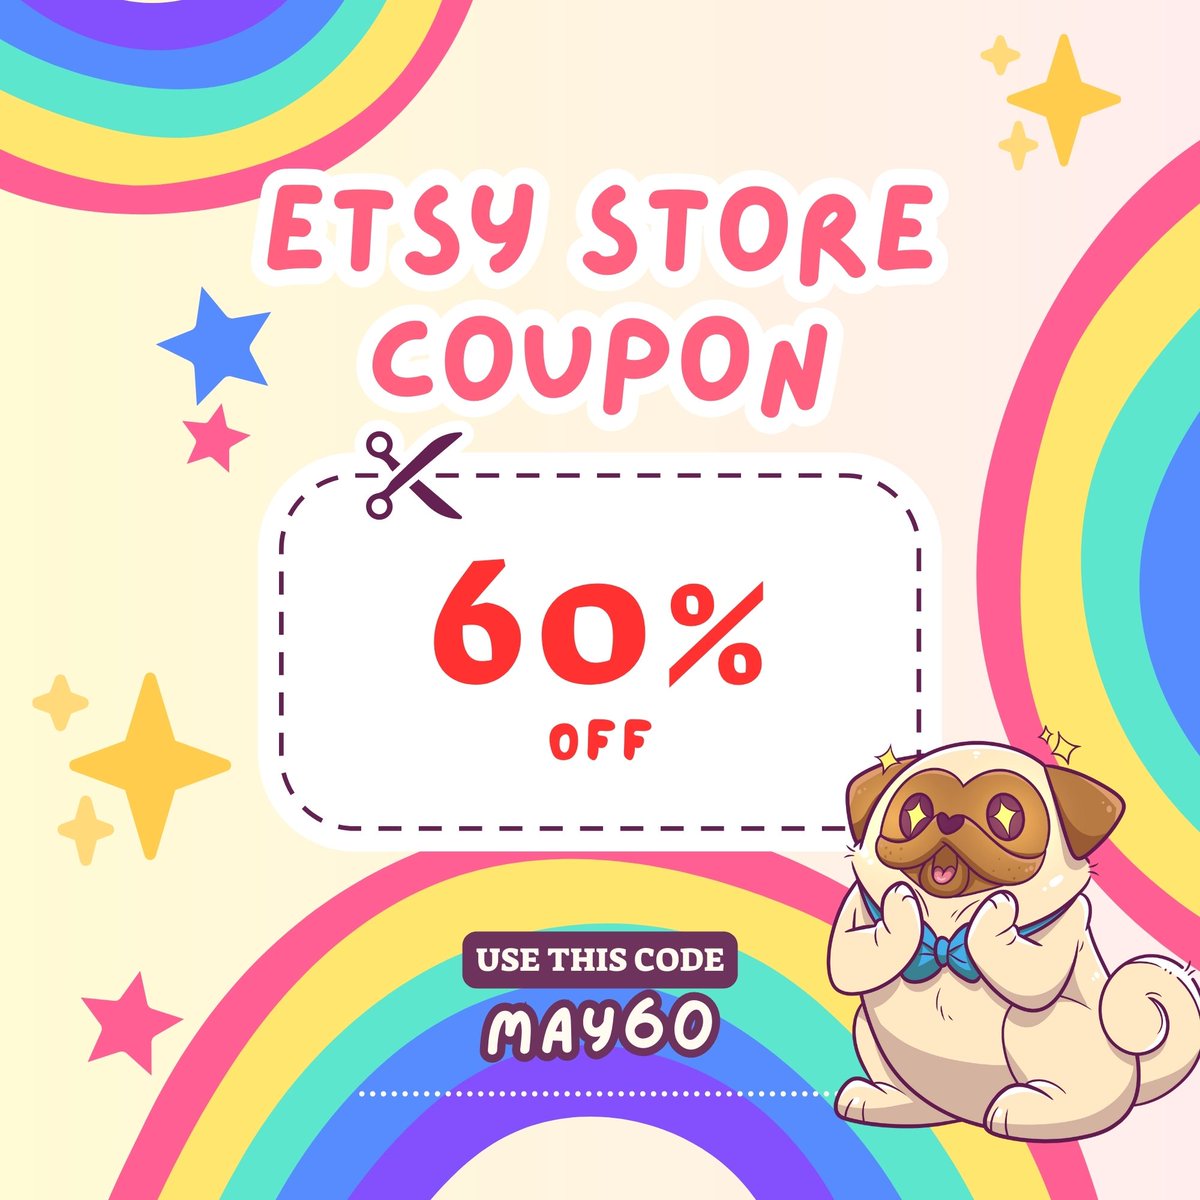 Big Sale Alert! 🎉 Use the promo code MAY60 and get 60% off on all items in our Etsy store! From cute pug printables to creative gifts, we've got you covered. Start shopping now: etsy.com/shop/DaliPugPr… 🐶👀🌸

#DaliPug #EtsySale #PromoCode #DIYGifts